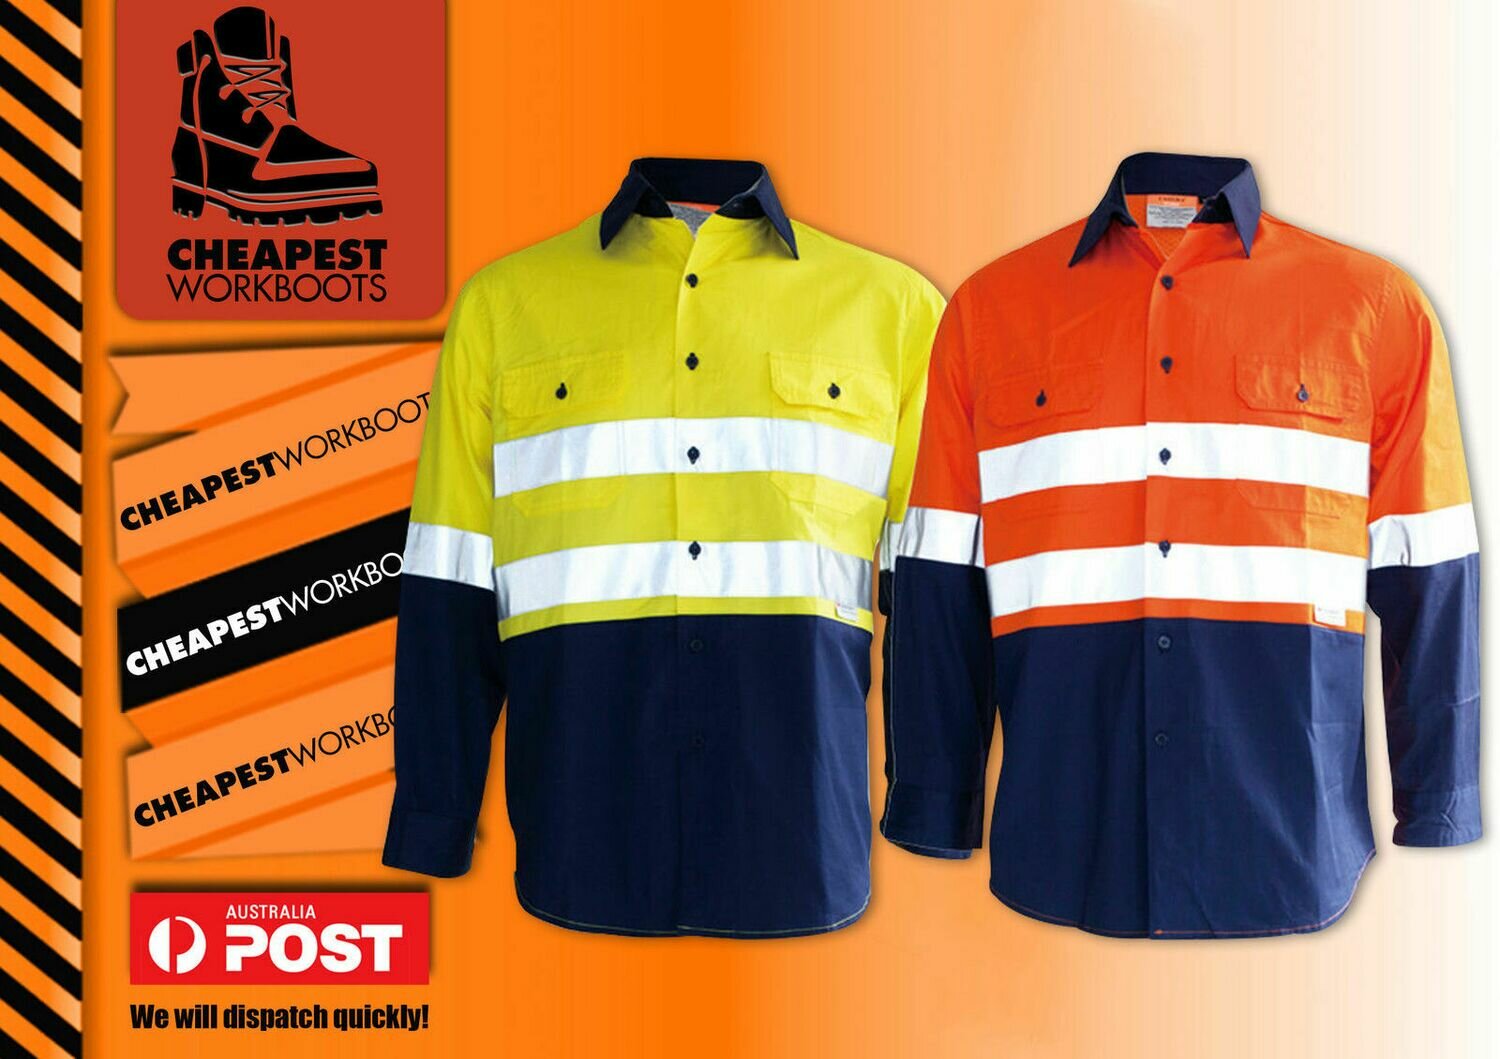 3x Hi Vis Cotton Drill Shirt Reflective, Vents Long Sleeve Safety Work Wear, Choose: Pack of 3, Colour: Orange/ Navy, Size: S